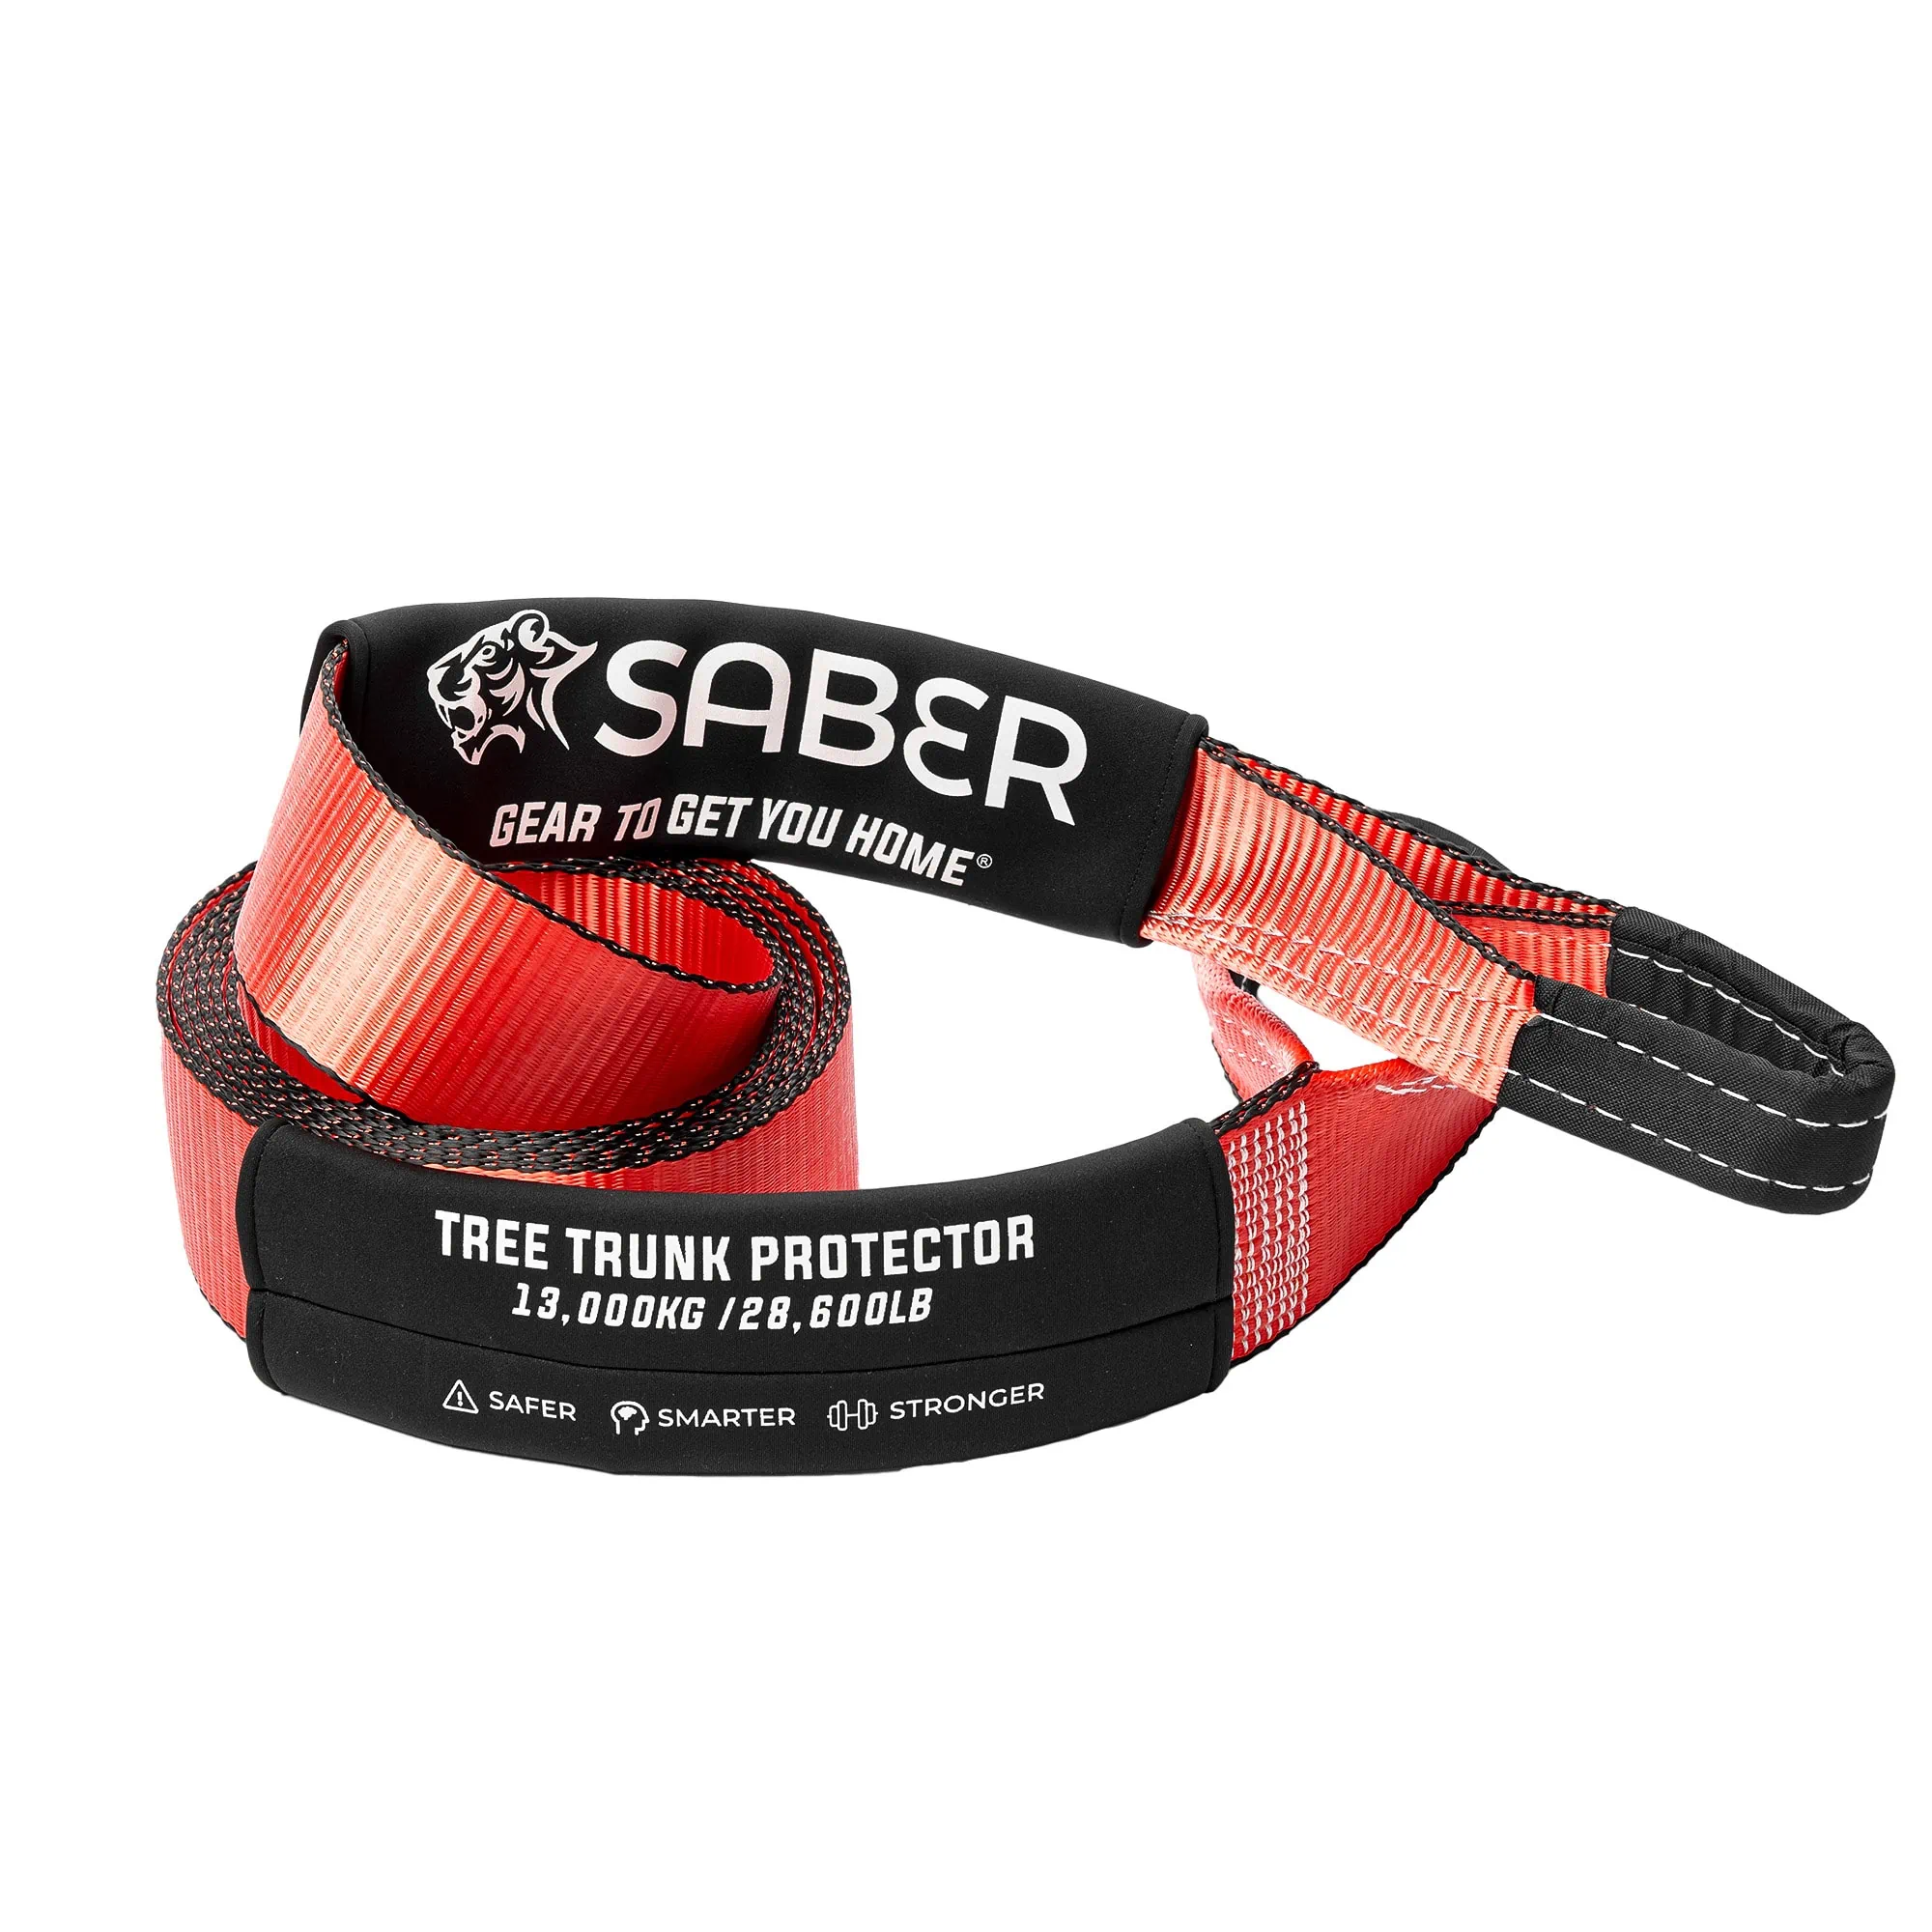 1. Tree Trunk Protector 1